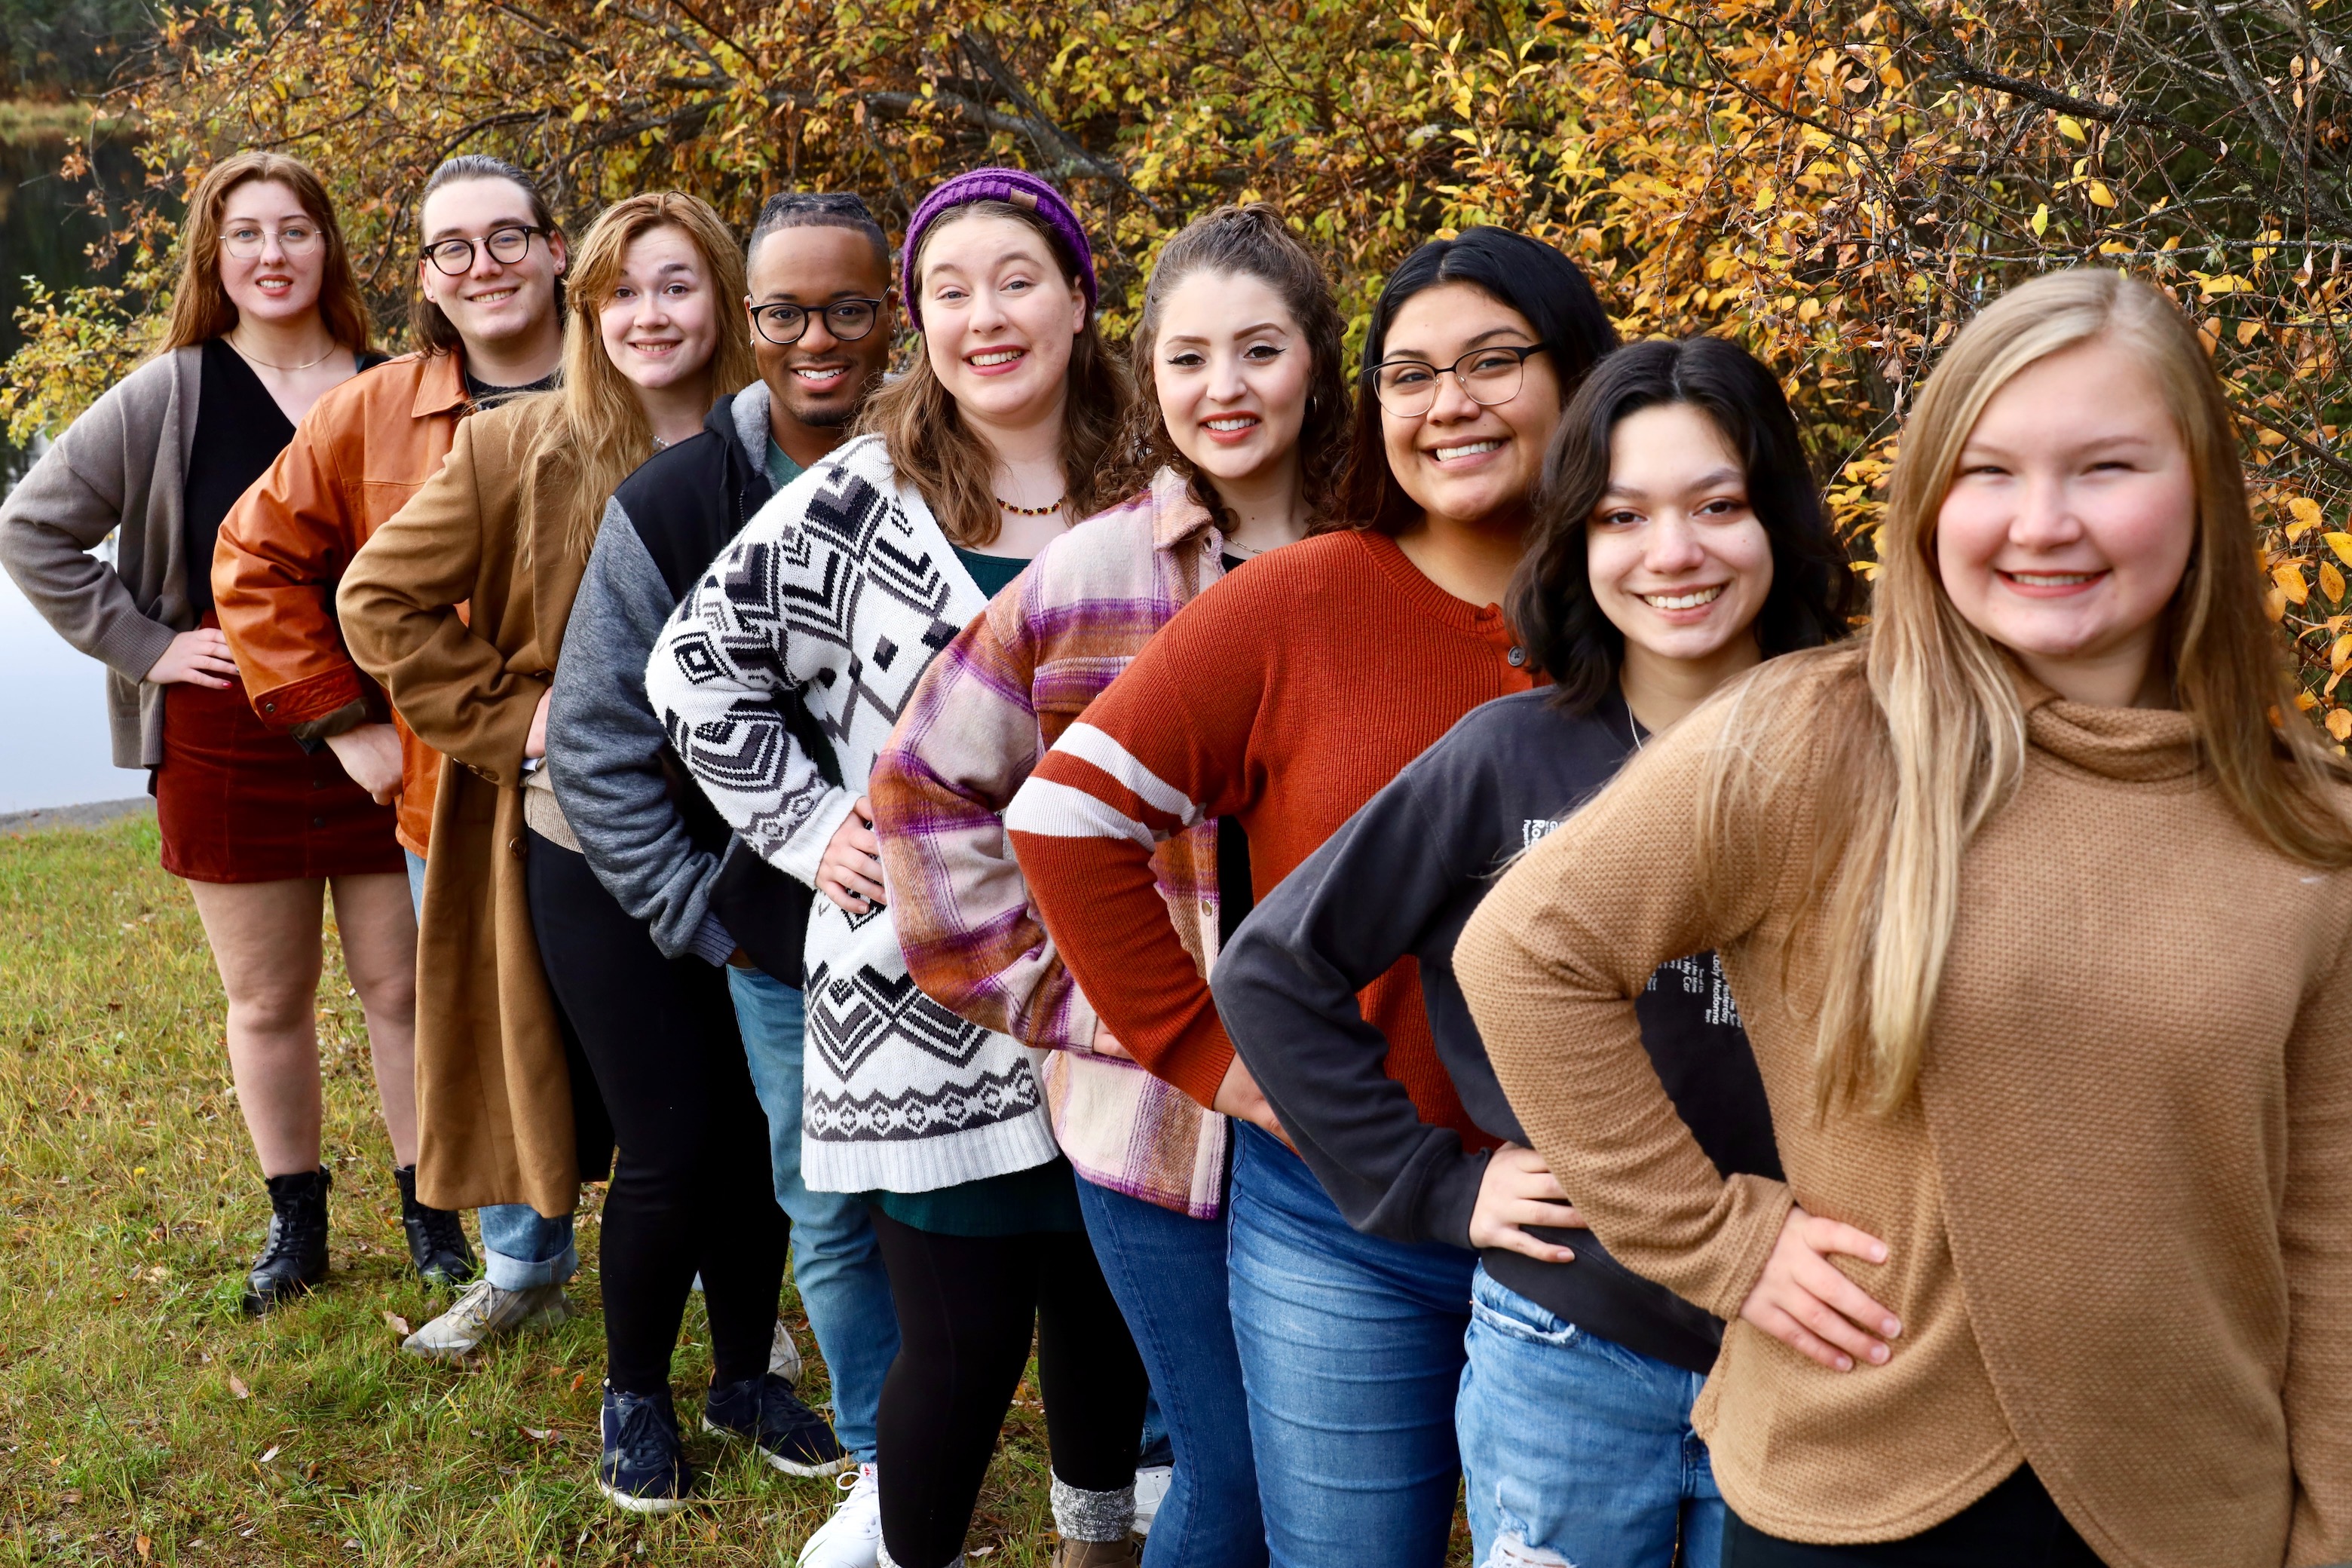 Music students stand in a line outside in front of the autumn foliage